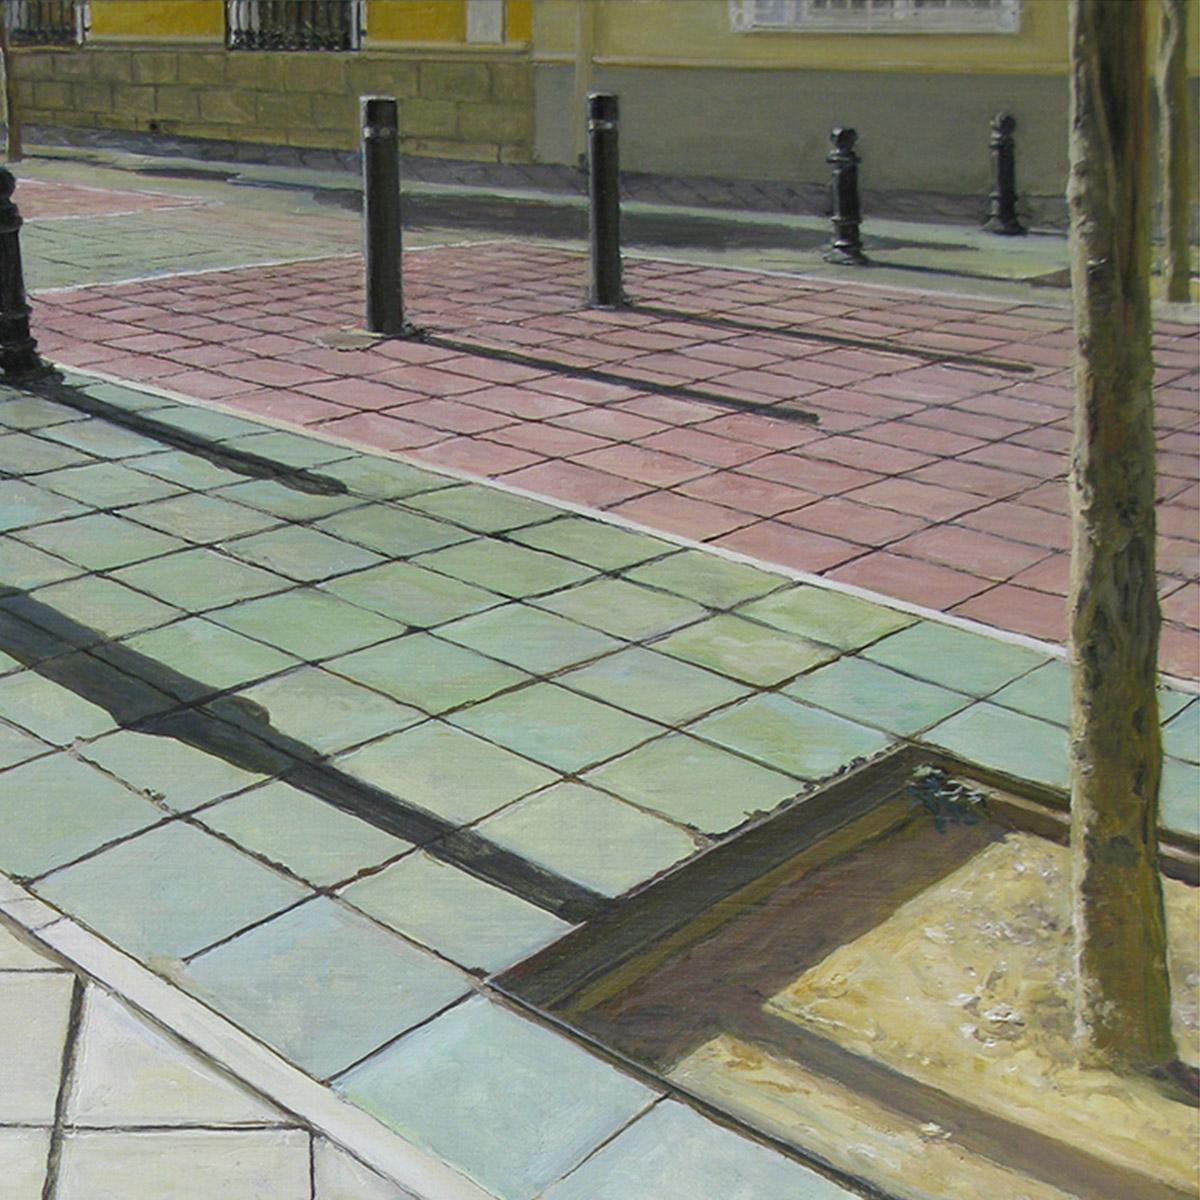 Félix de la Concha is a Spanish artist with an international projection. His compositions of architectural landscapes, painted entirely in the outdoors, emphasize the everyday and the ephemeral of time. Félix portrays the light, capturing even the